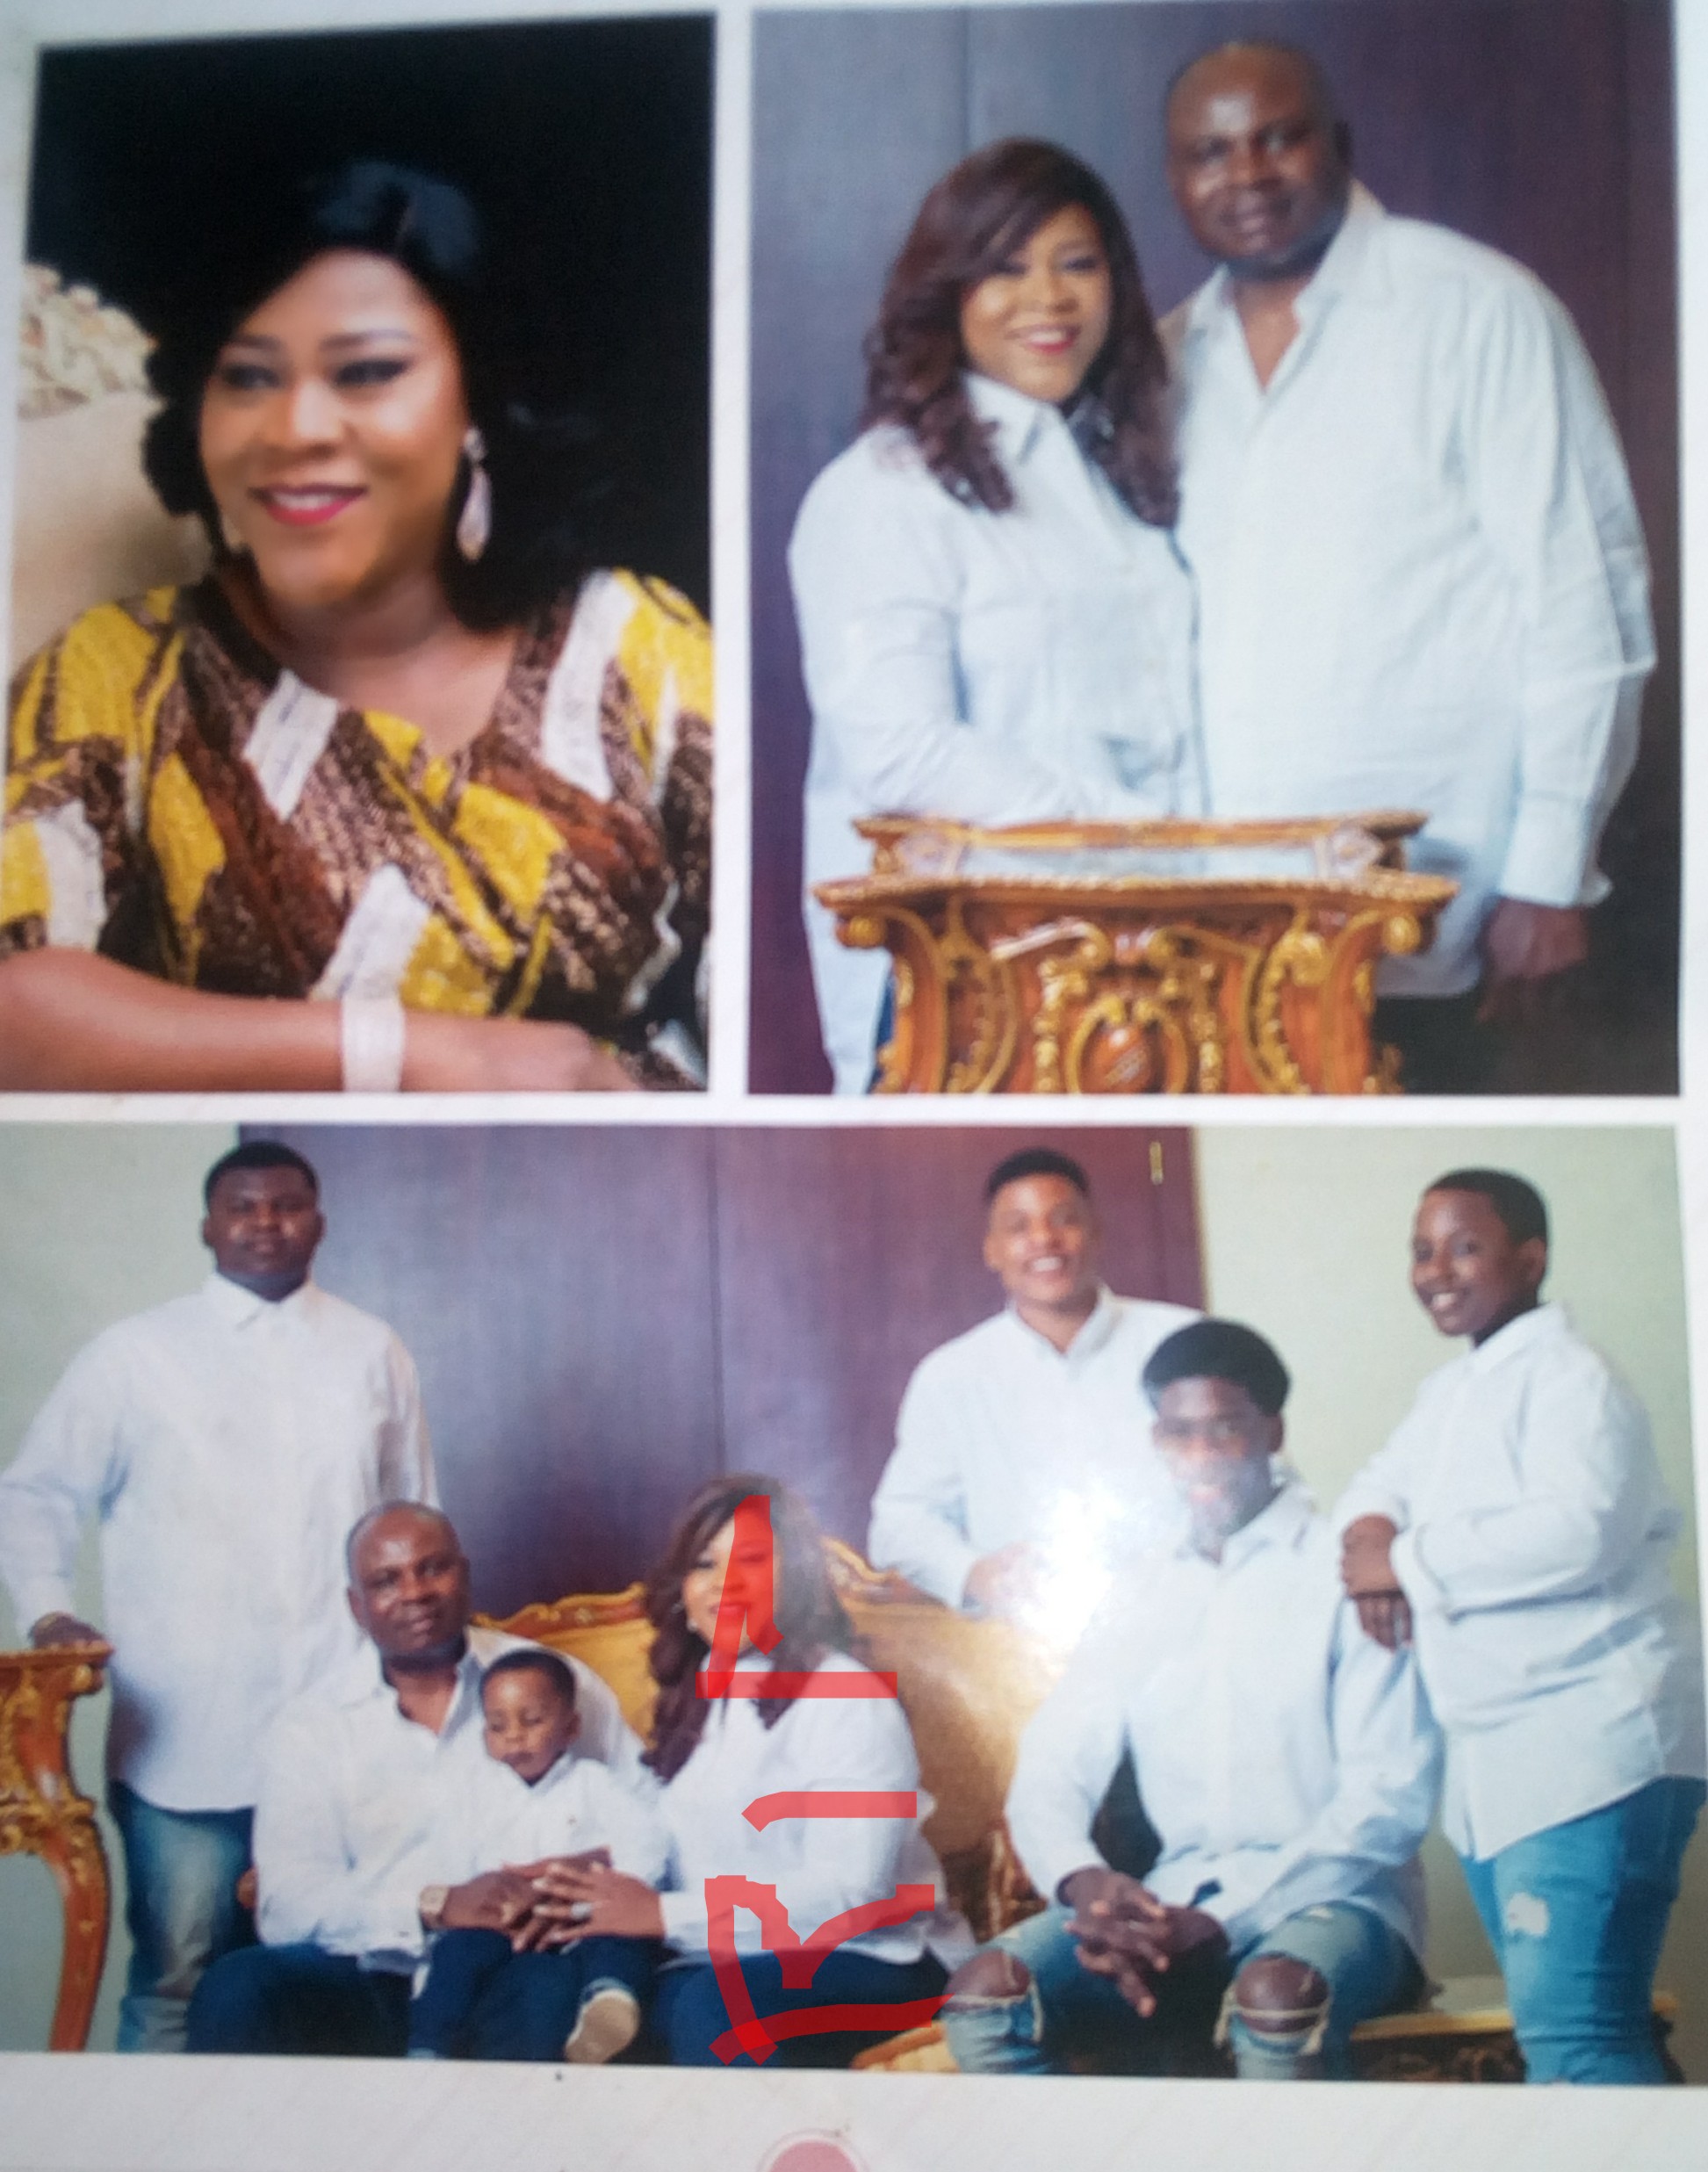 Burial of Mrs Nnenna Ukachukwu - What we Know